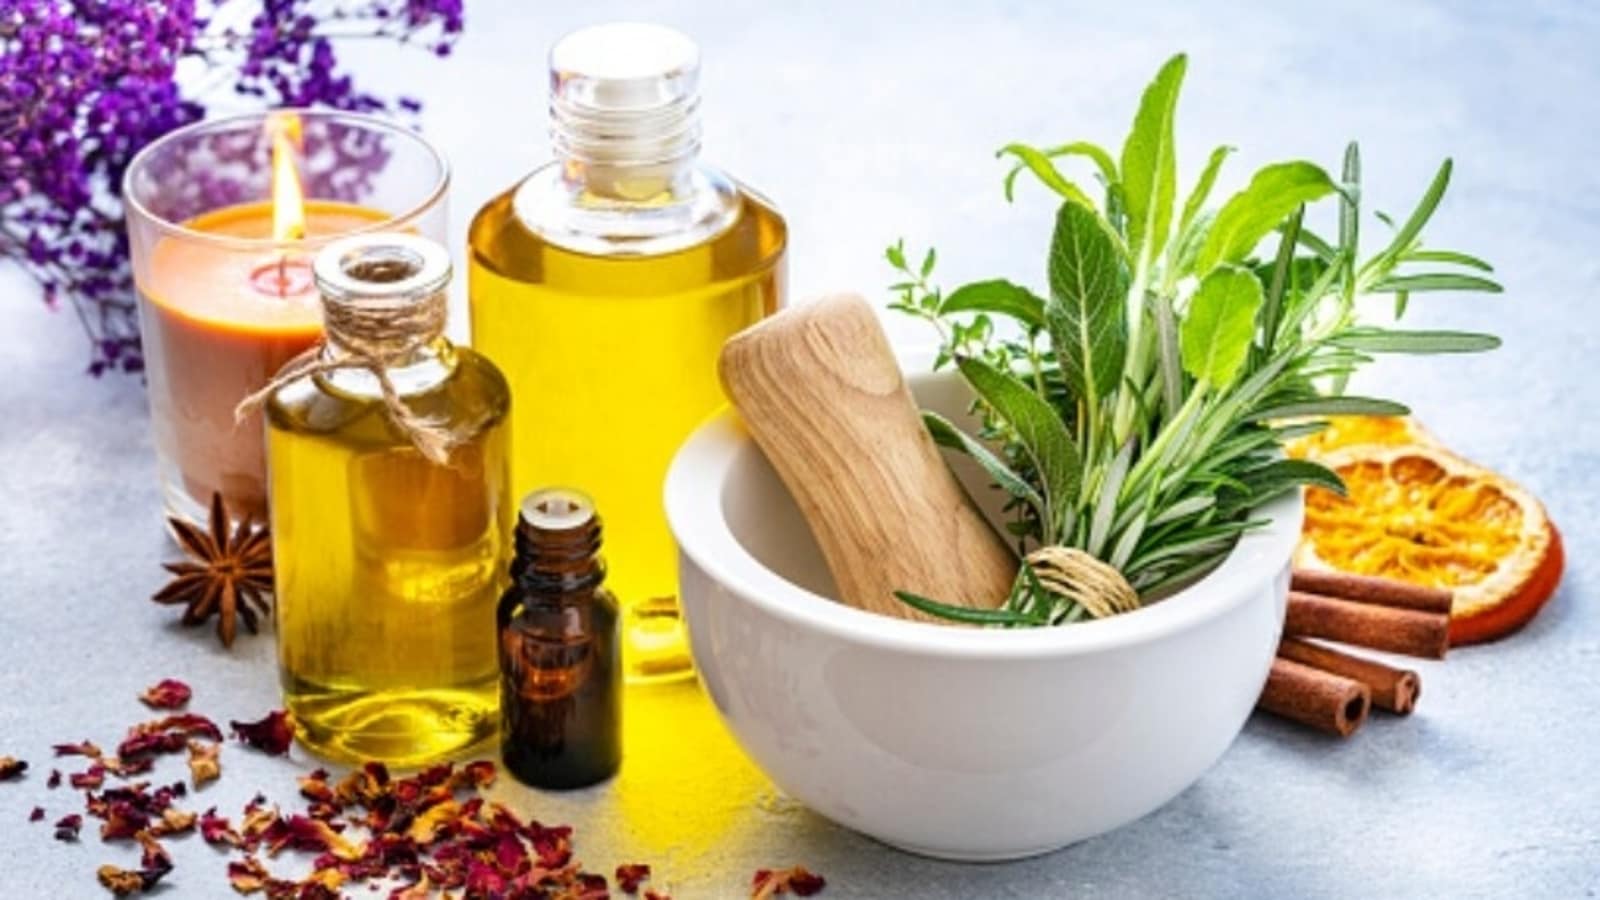 Gaining importance of natural ingredients in skincare: Experts explain